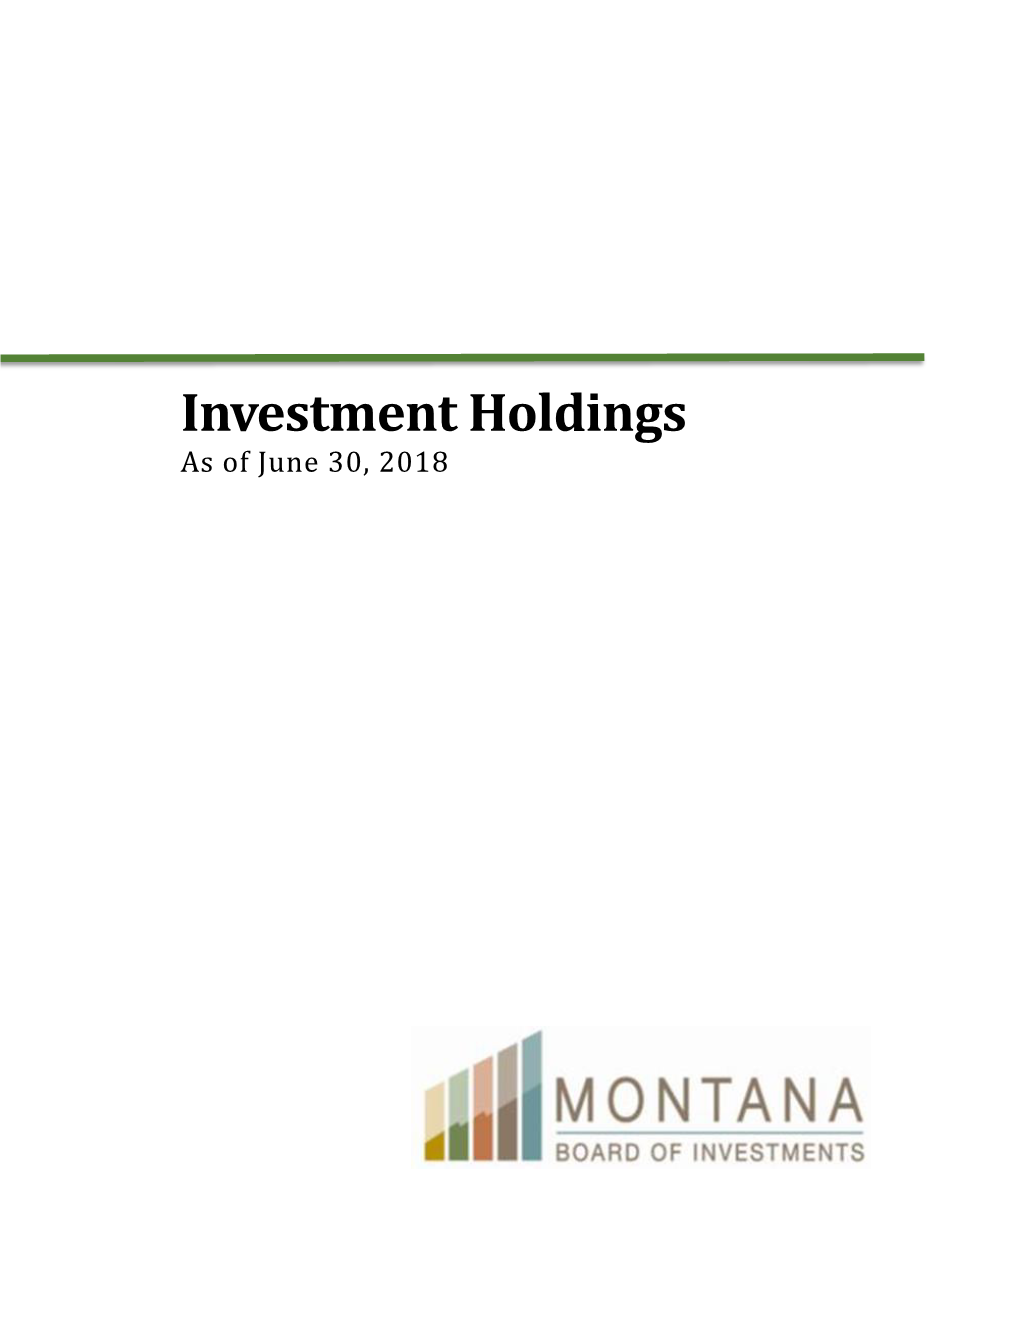 Investment Holdings As of June 30, 2018 Transparency of the Montana Investment Holdings